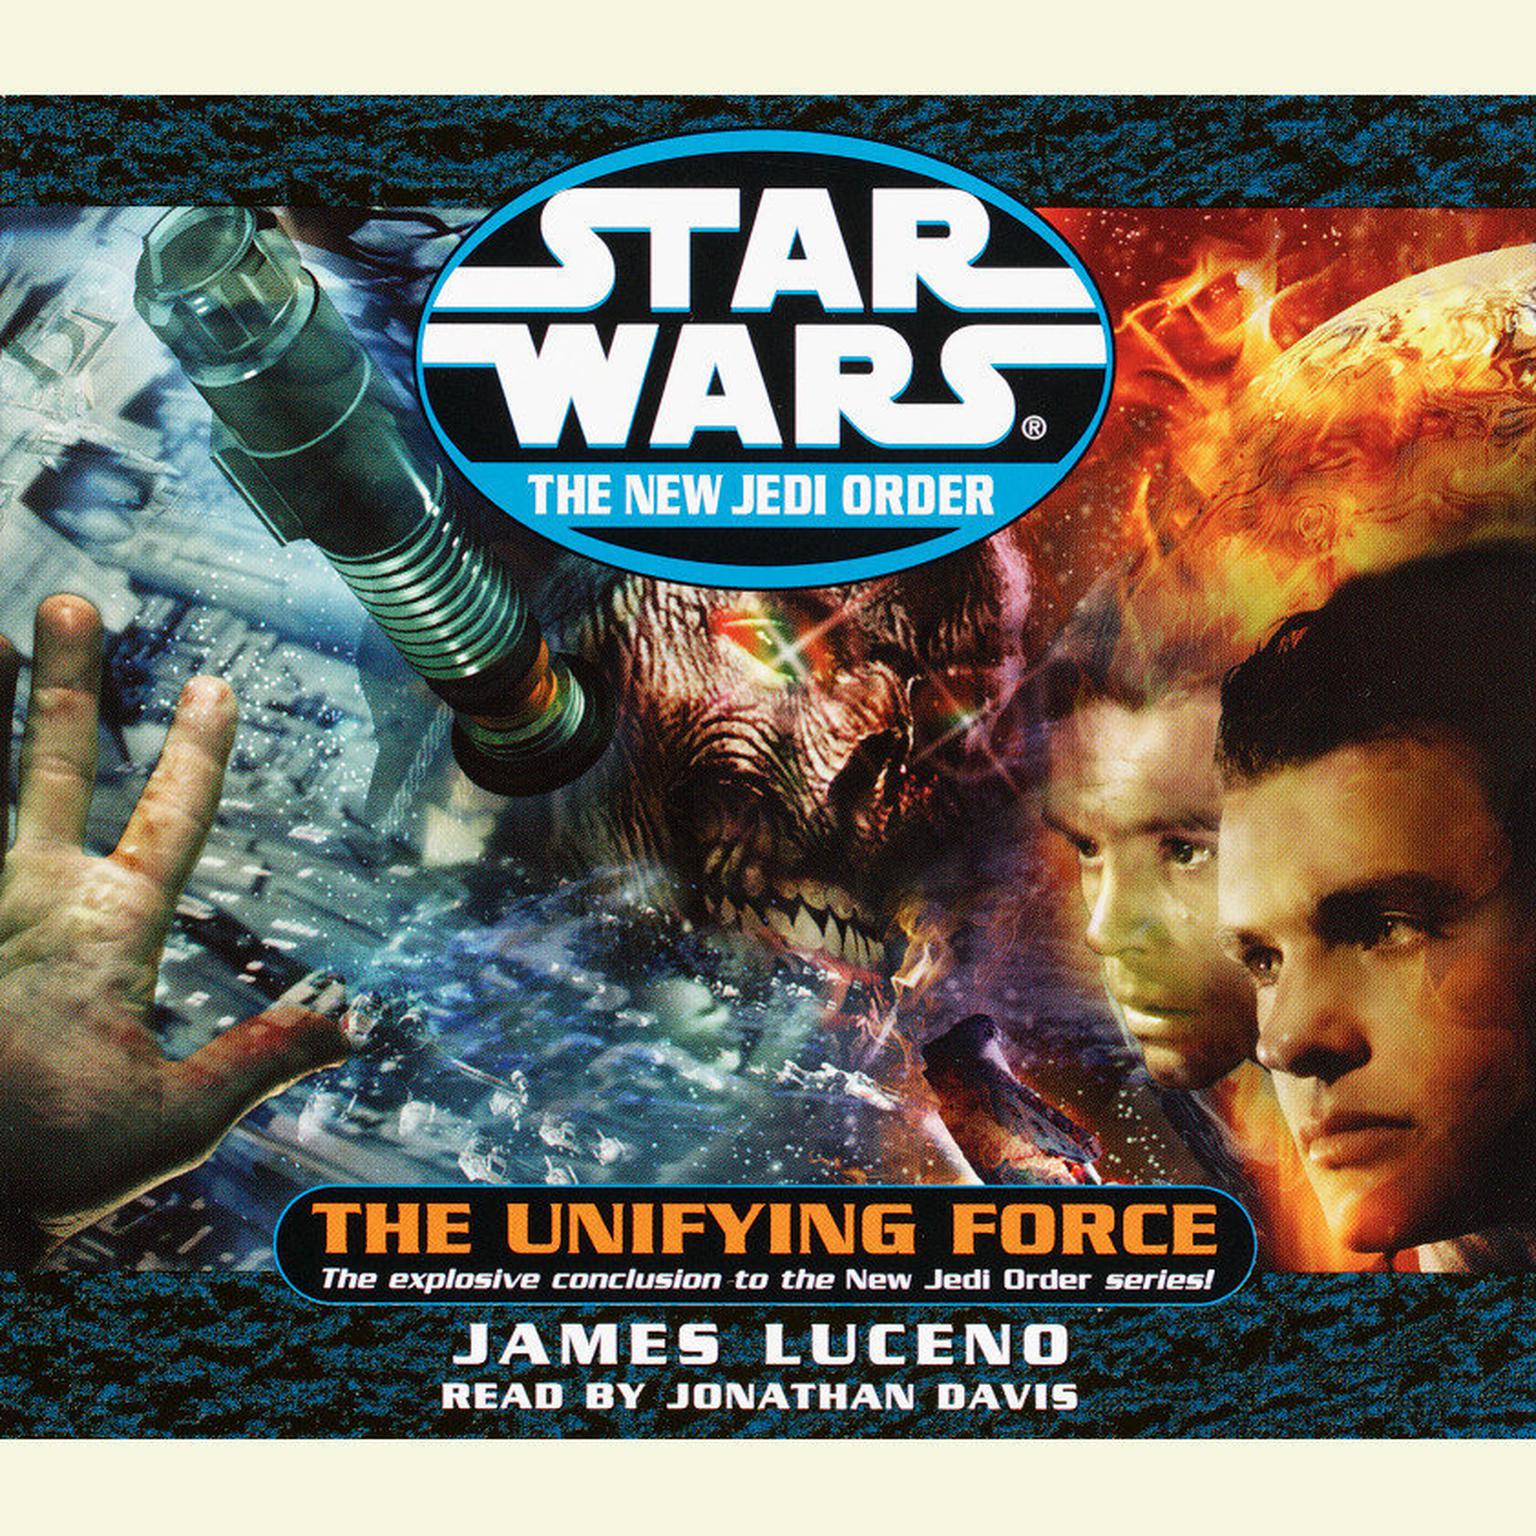 Star Wars: The New Jedi Order: The Unifying Force (Abridged) Audiobook, by James Luceno